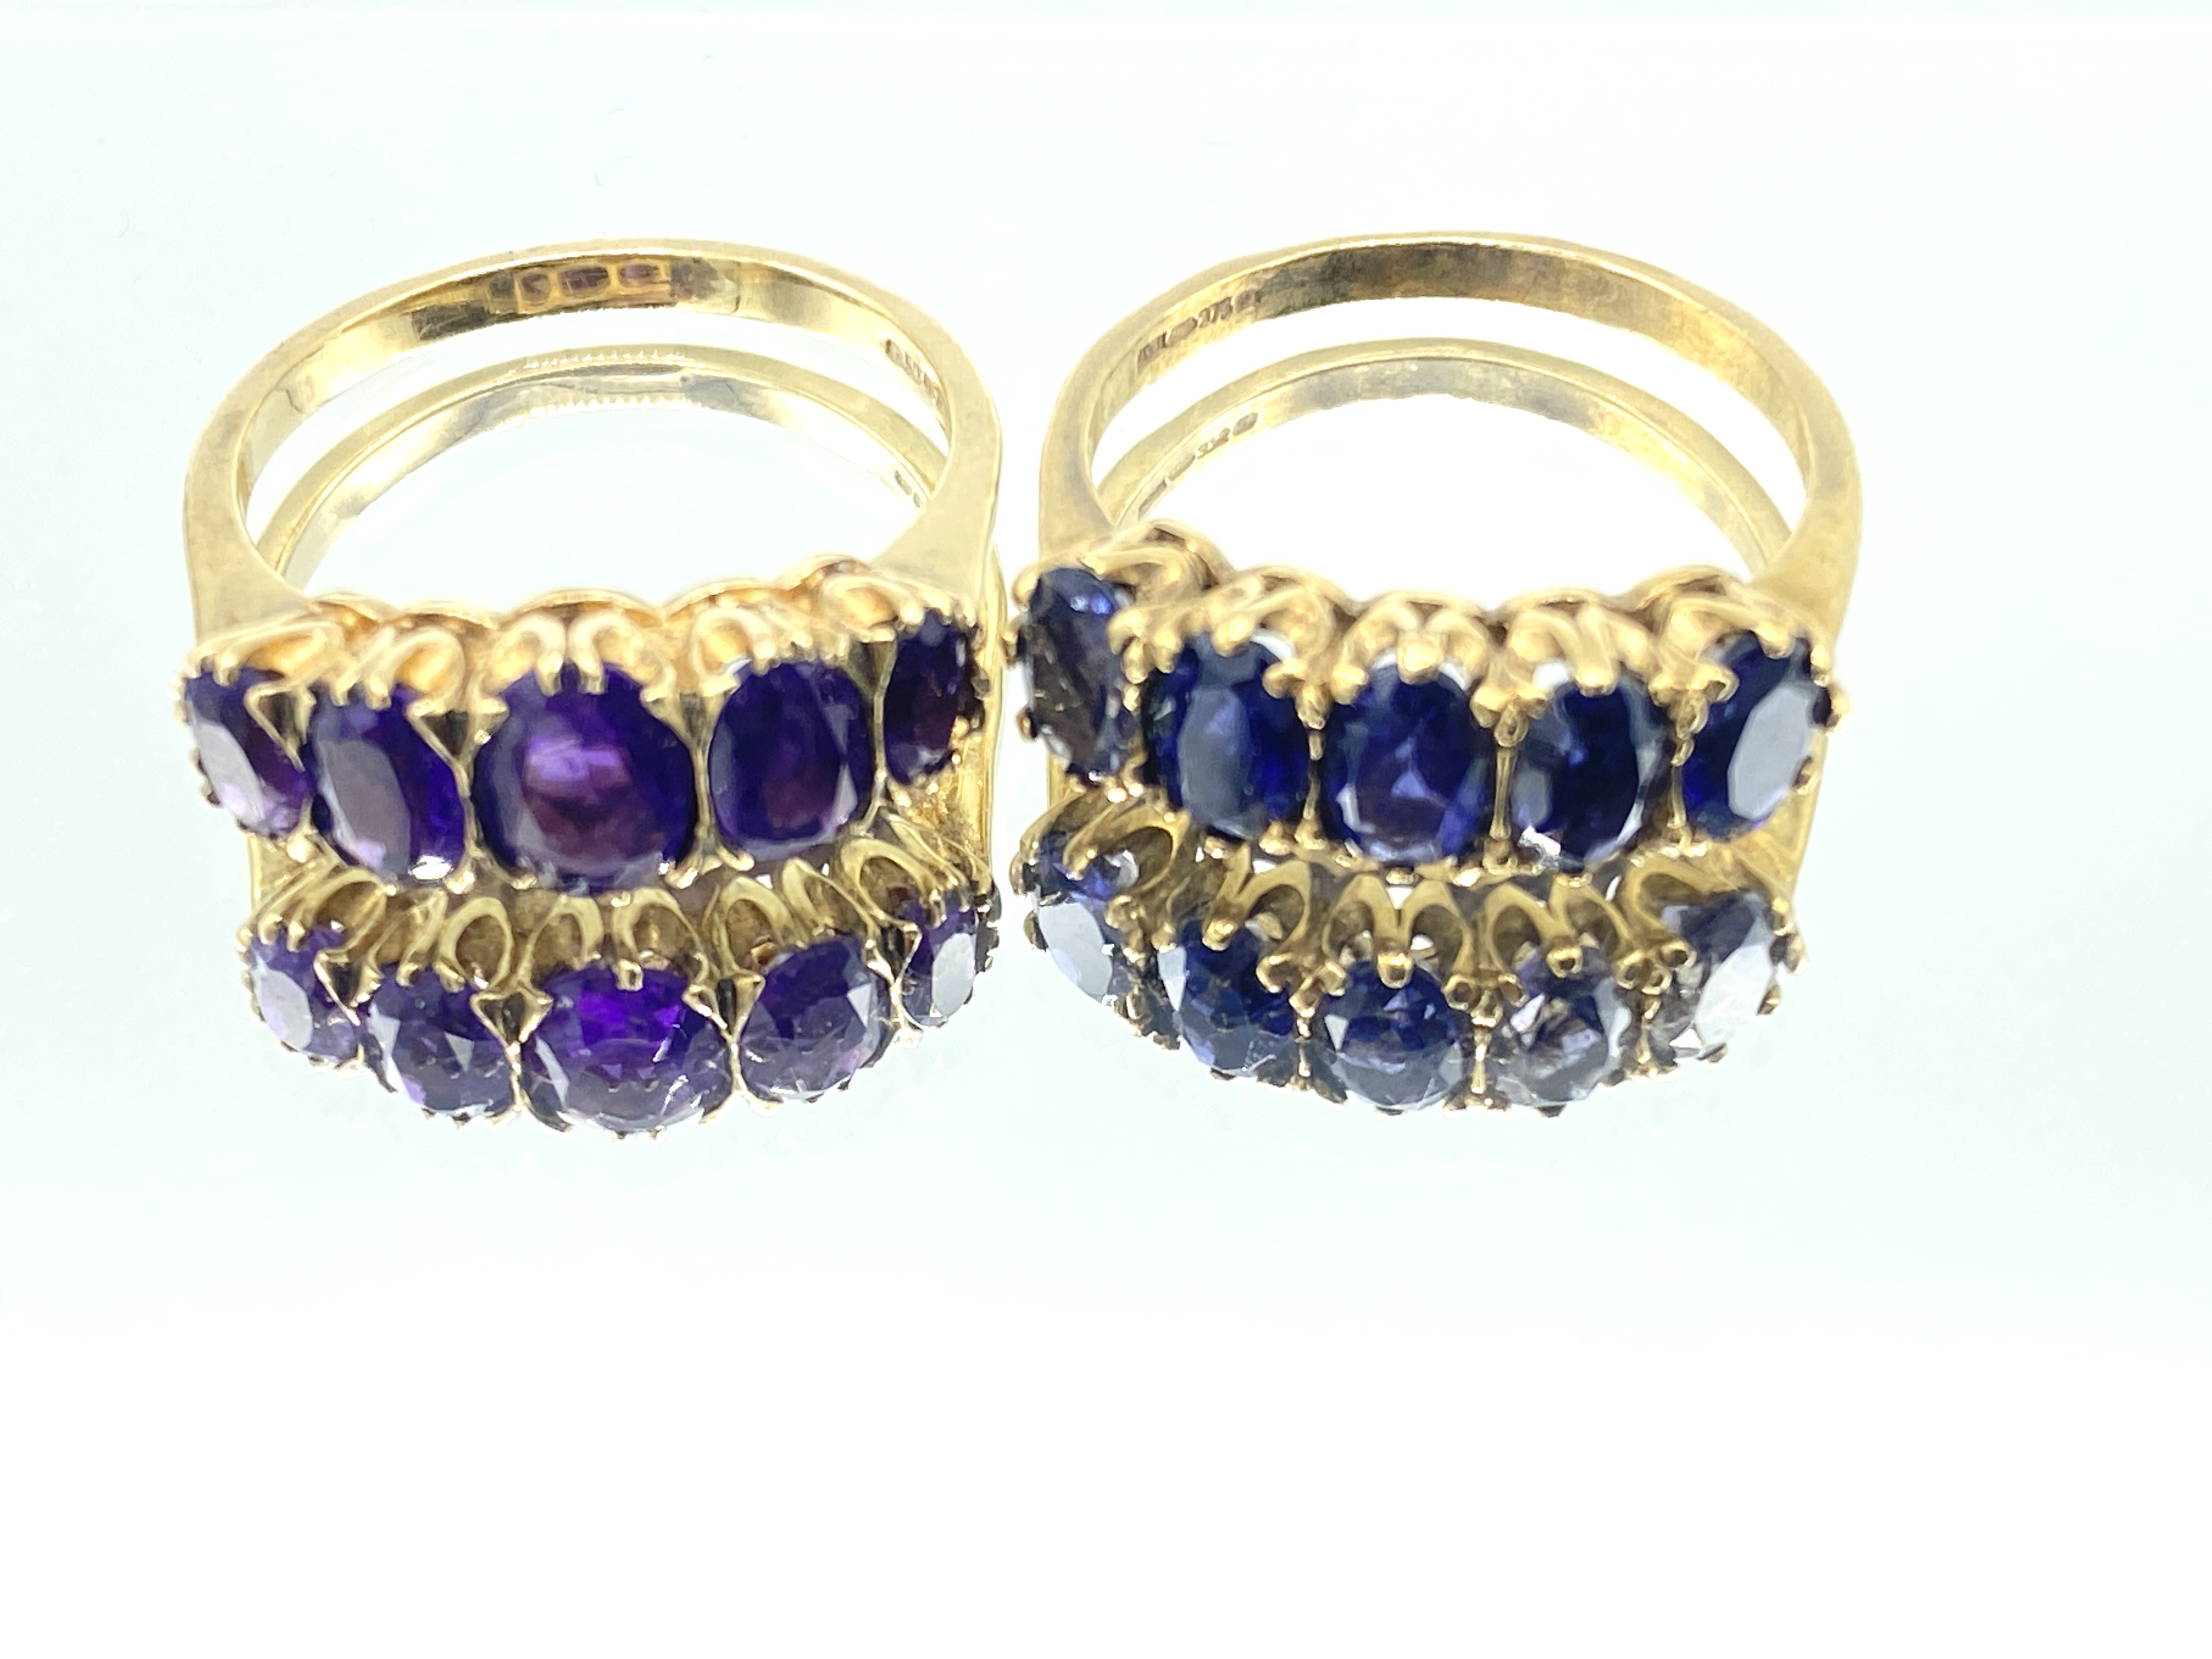 Two 9ct gold and 5 stone rings